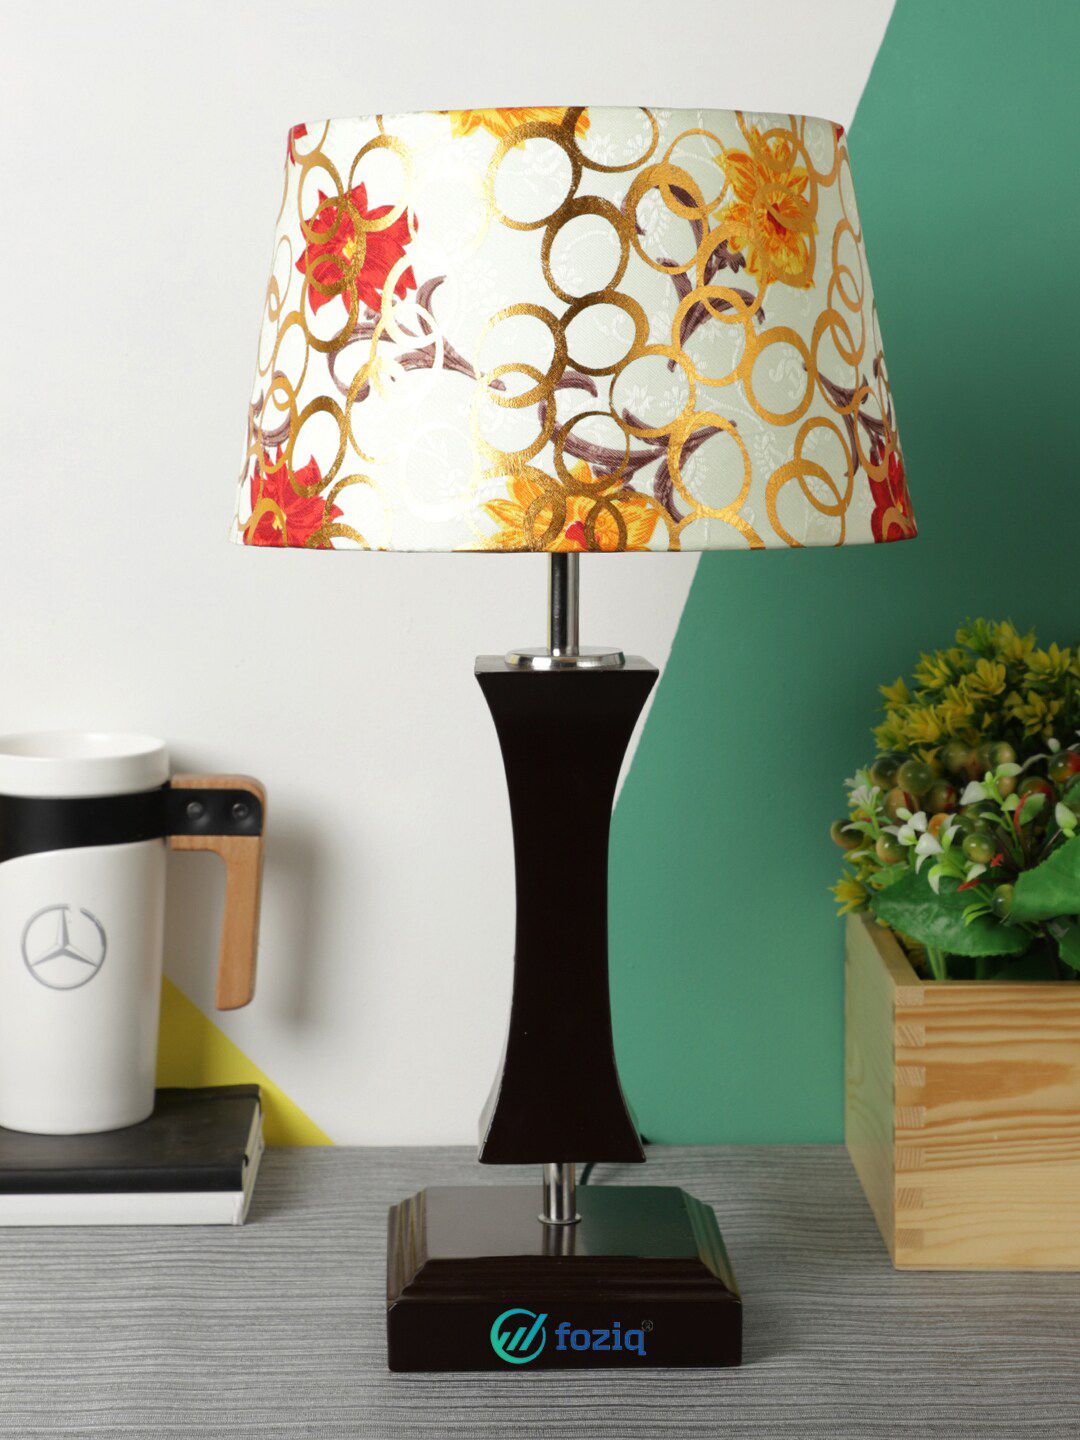 foziq Brown & White Printed Table Lamp with Shade Price in India